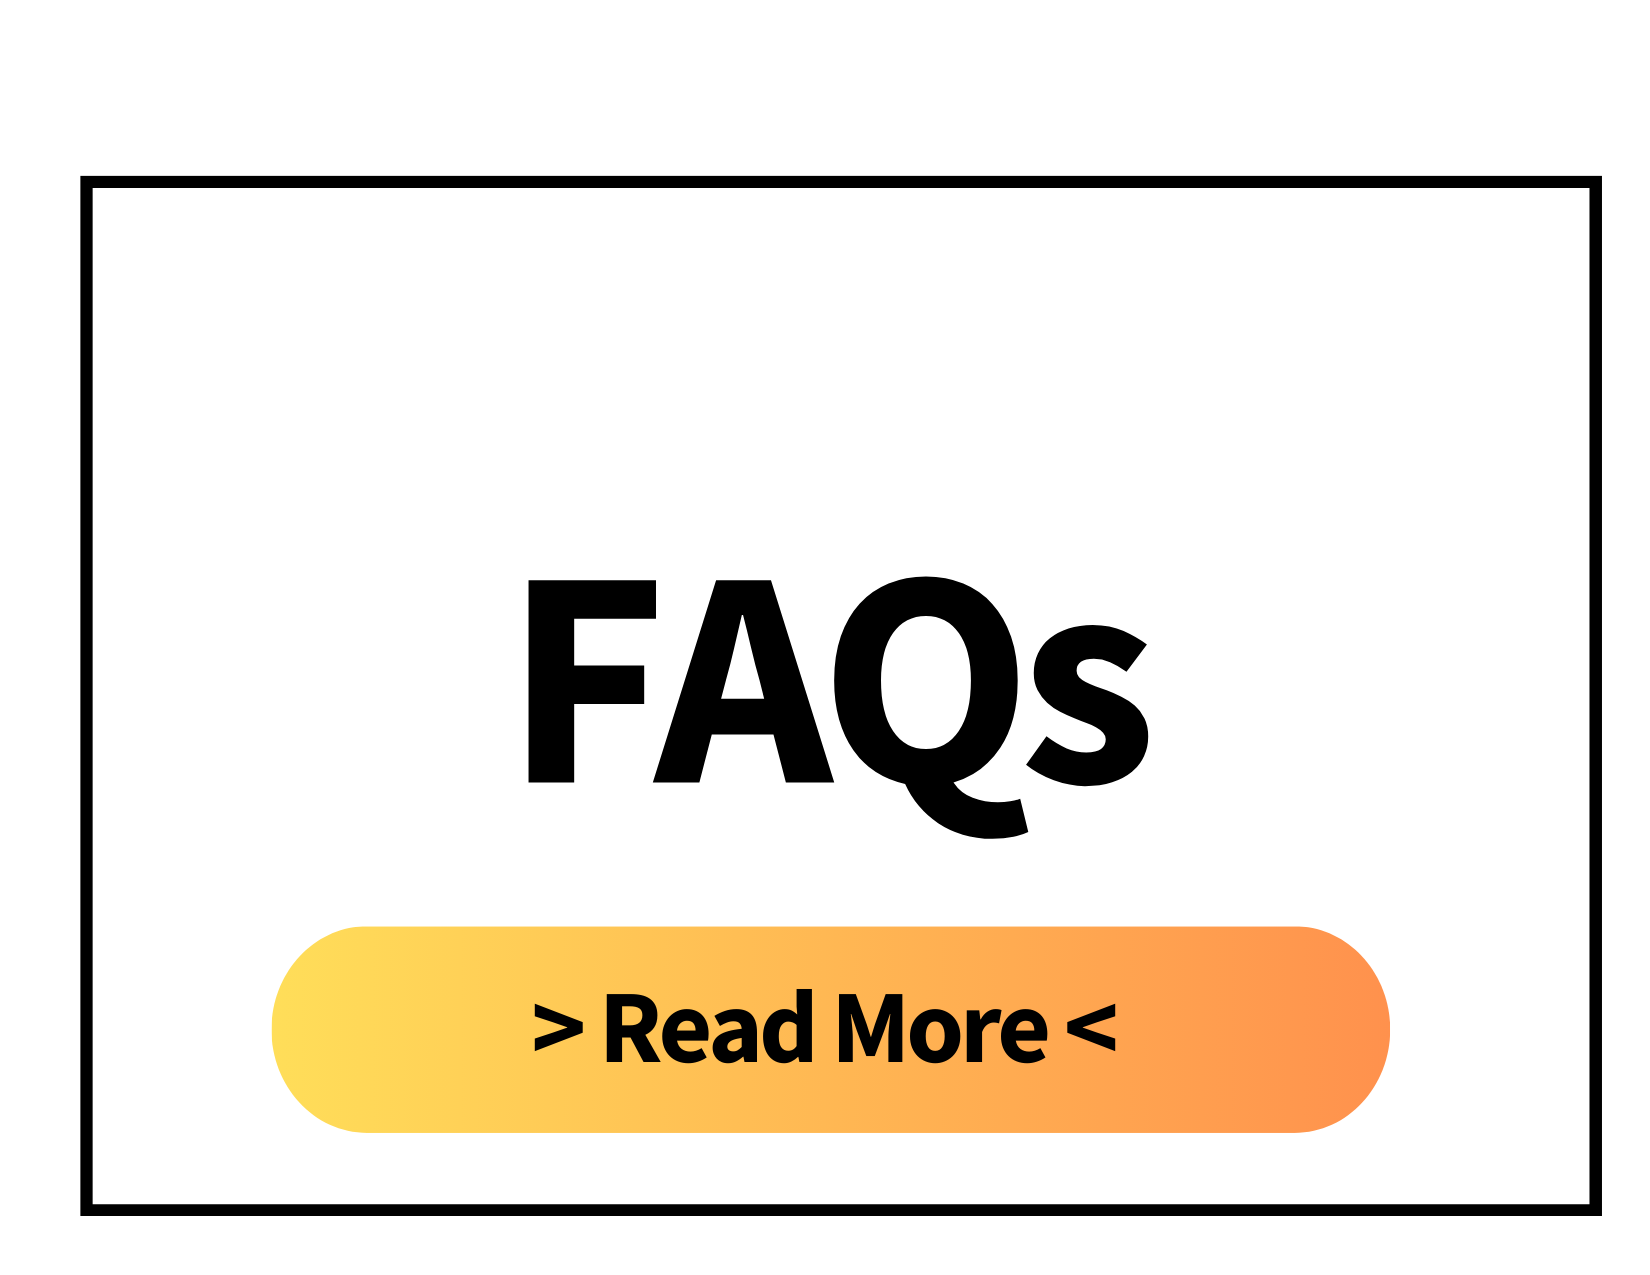 Frequently asked questions: read more